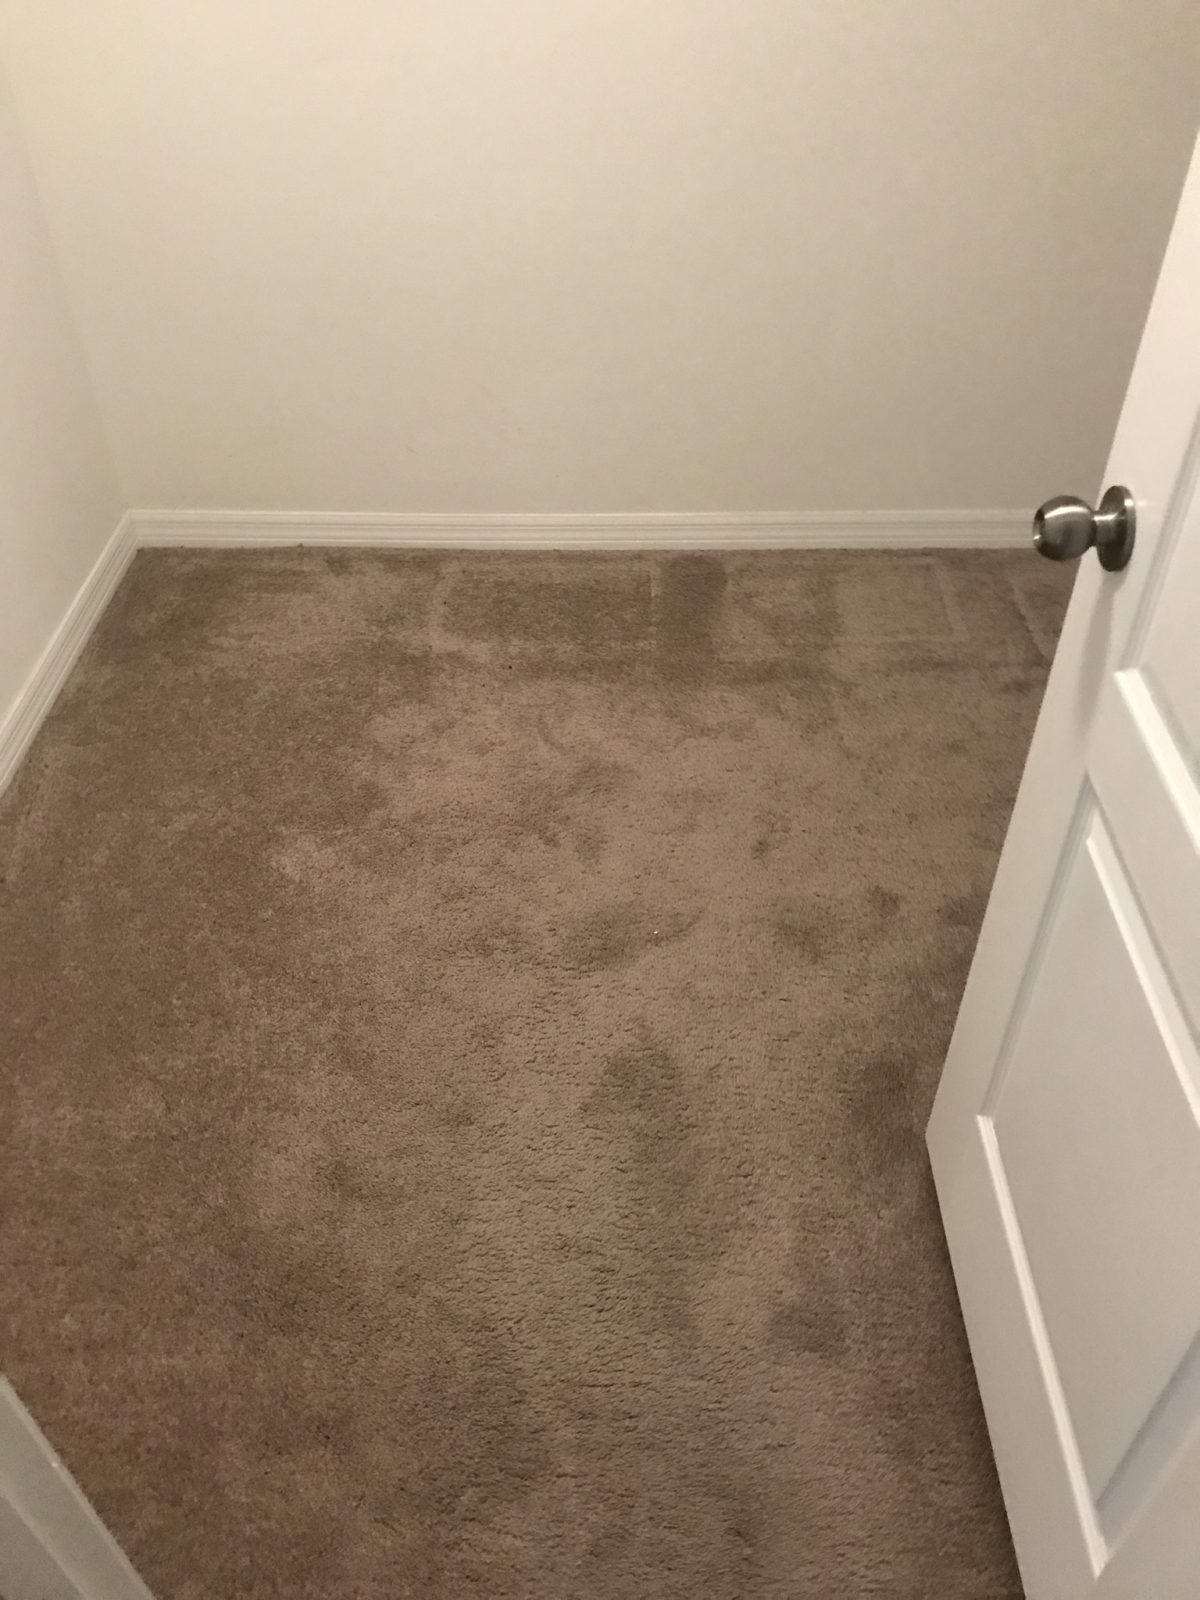 Professional Carpet Cleaning New Port Richey Florida by Howards Cleaning Service